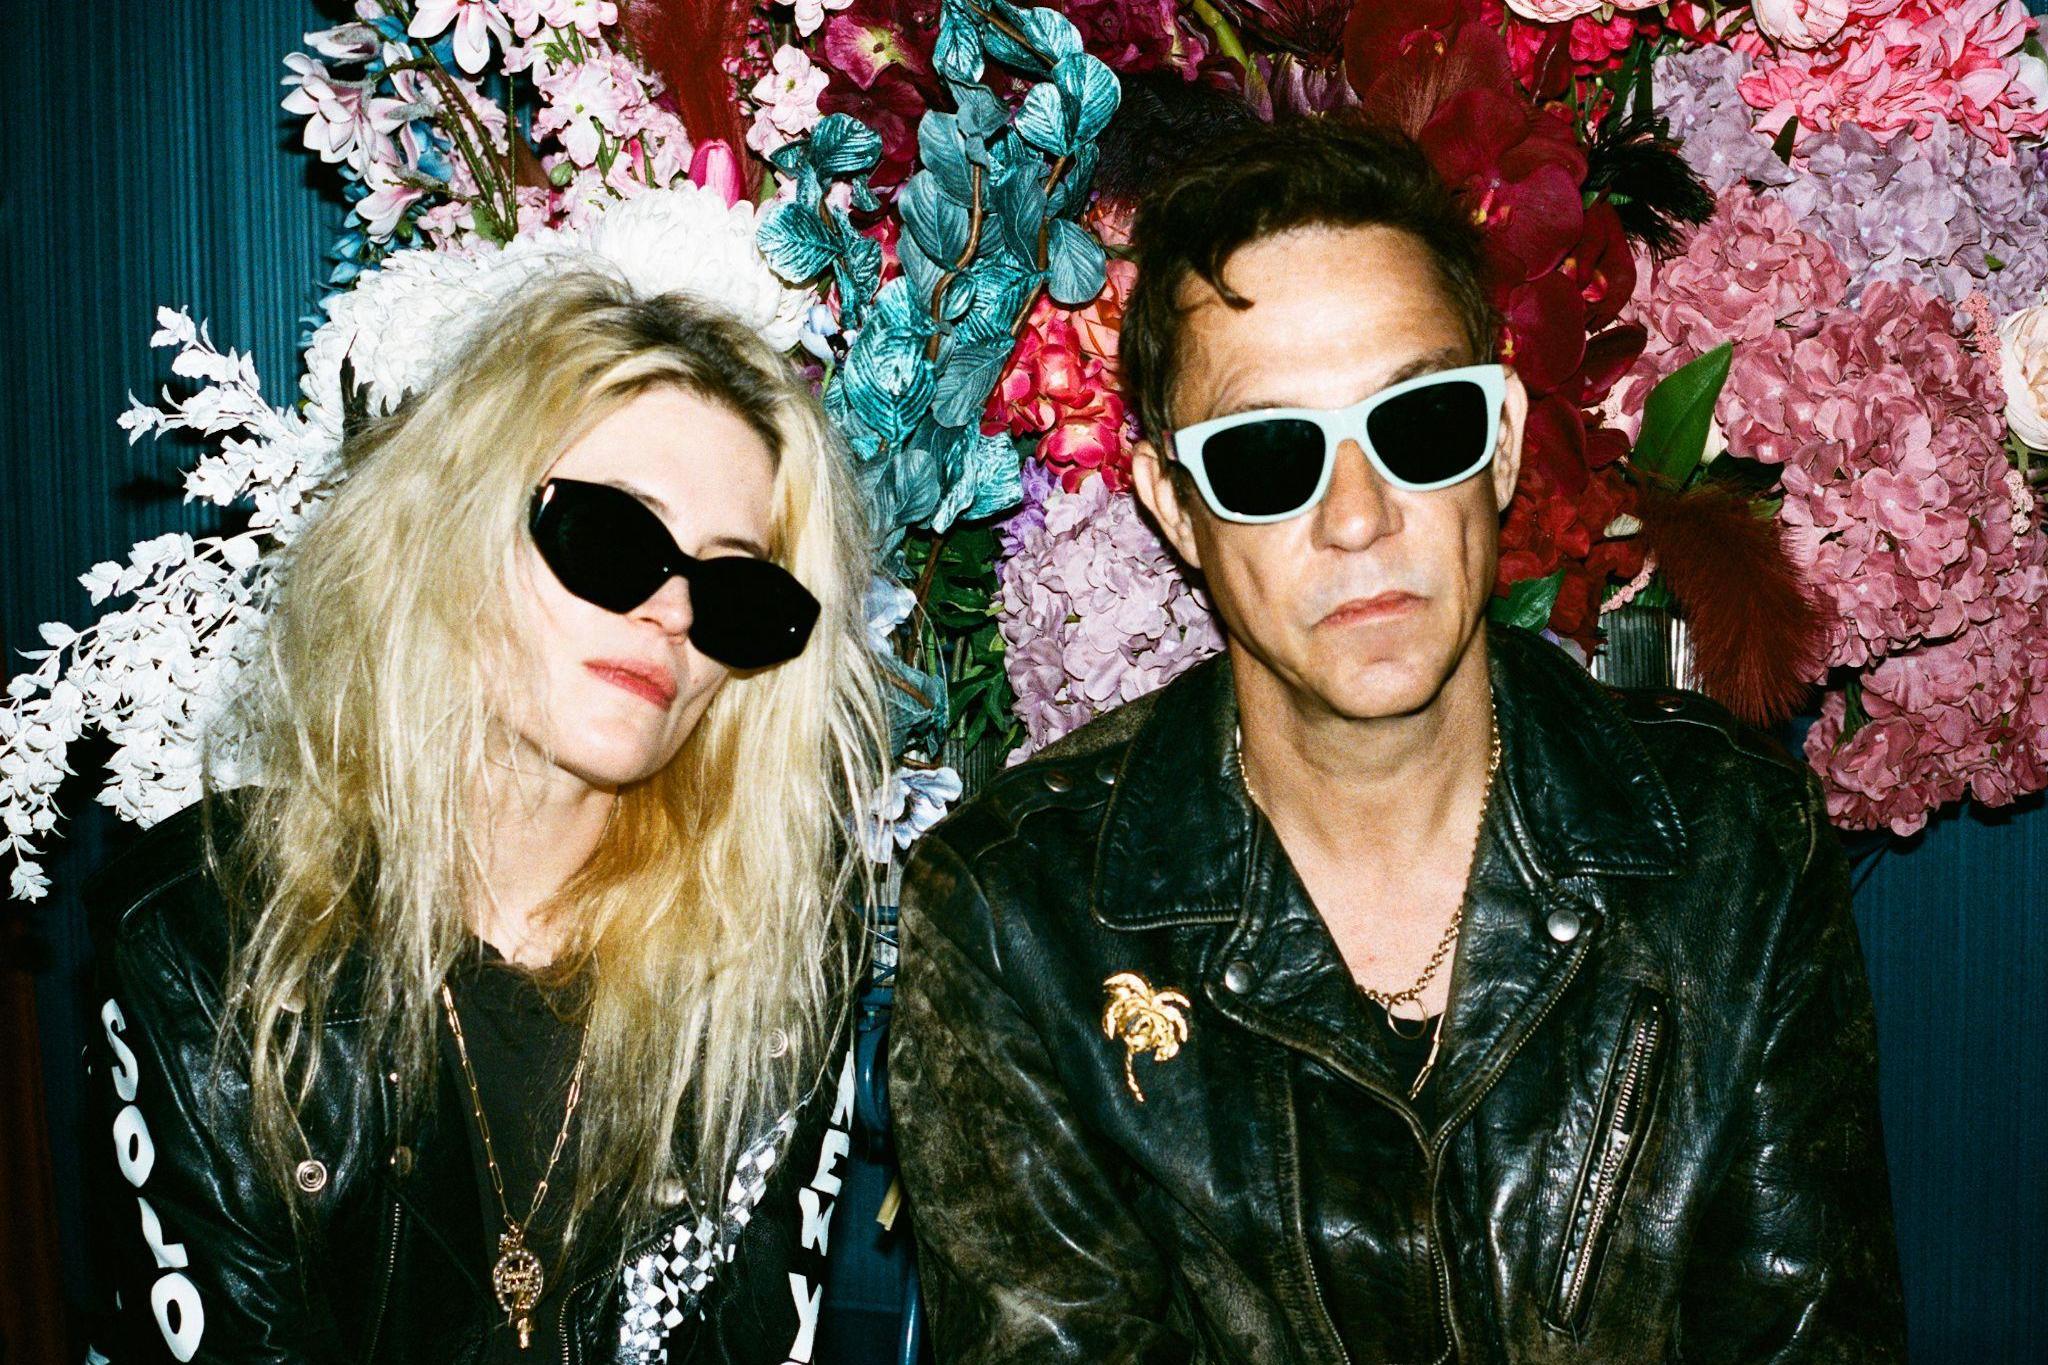 ‘We started out like some art project, making crazy, experimental spaghetti western music,’ says Jamie Hince of his early collaboration with Alison Mosshart